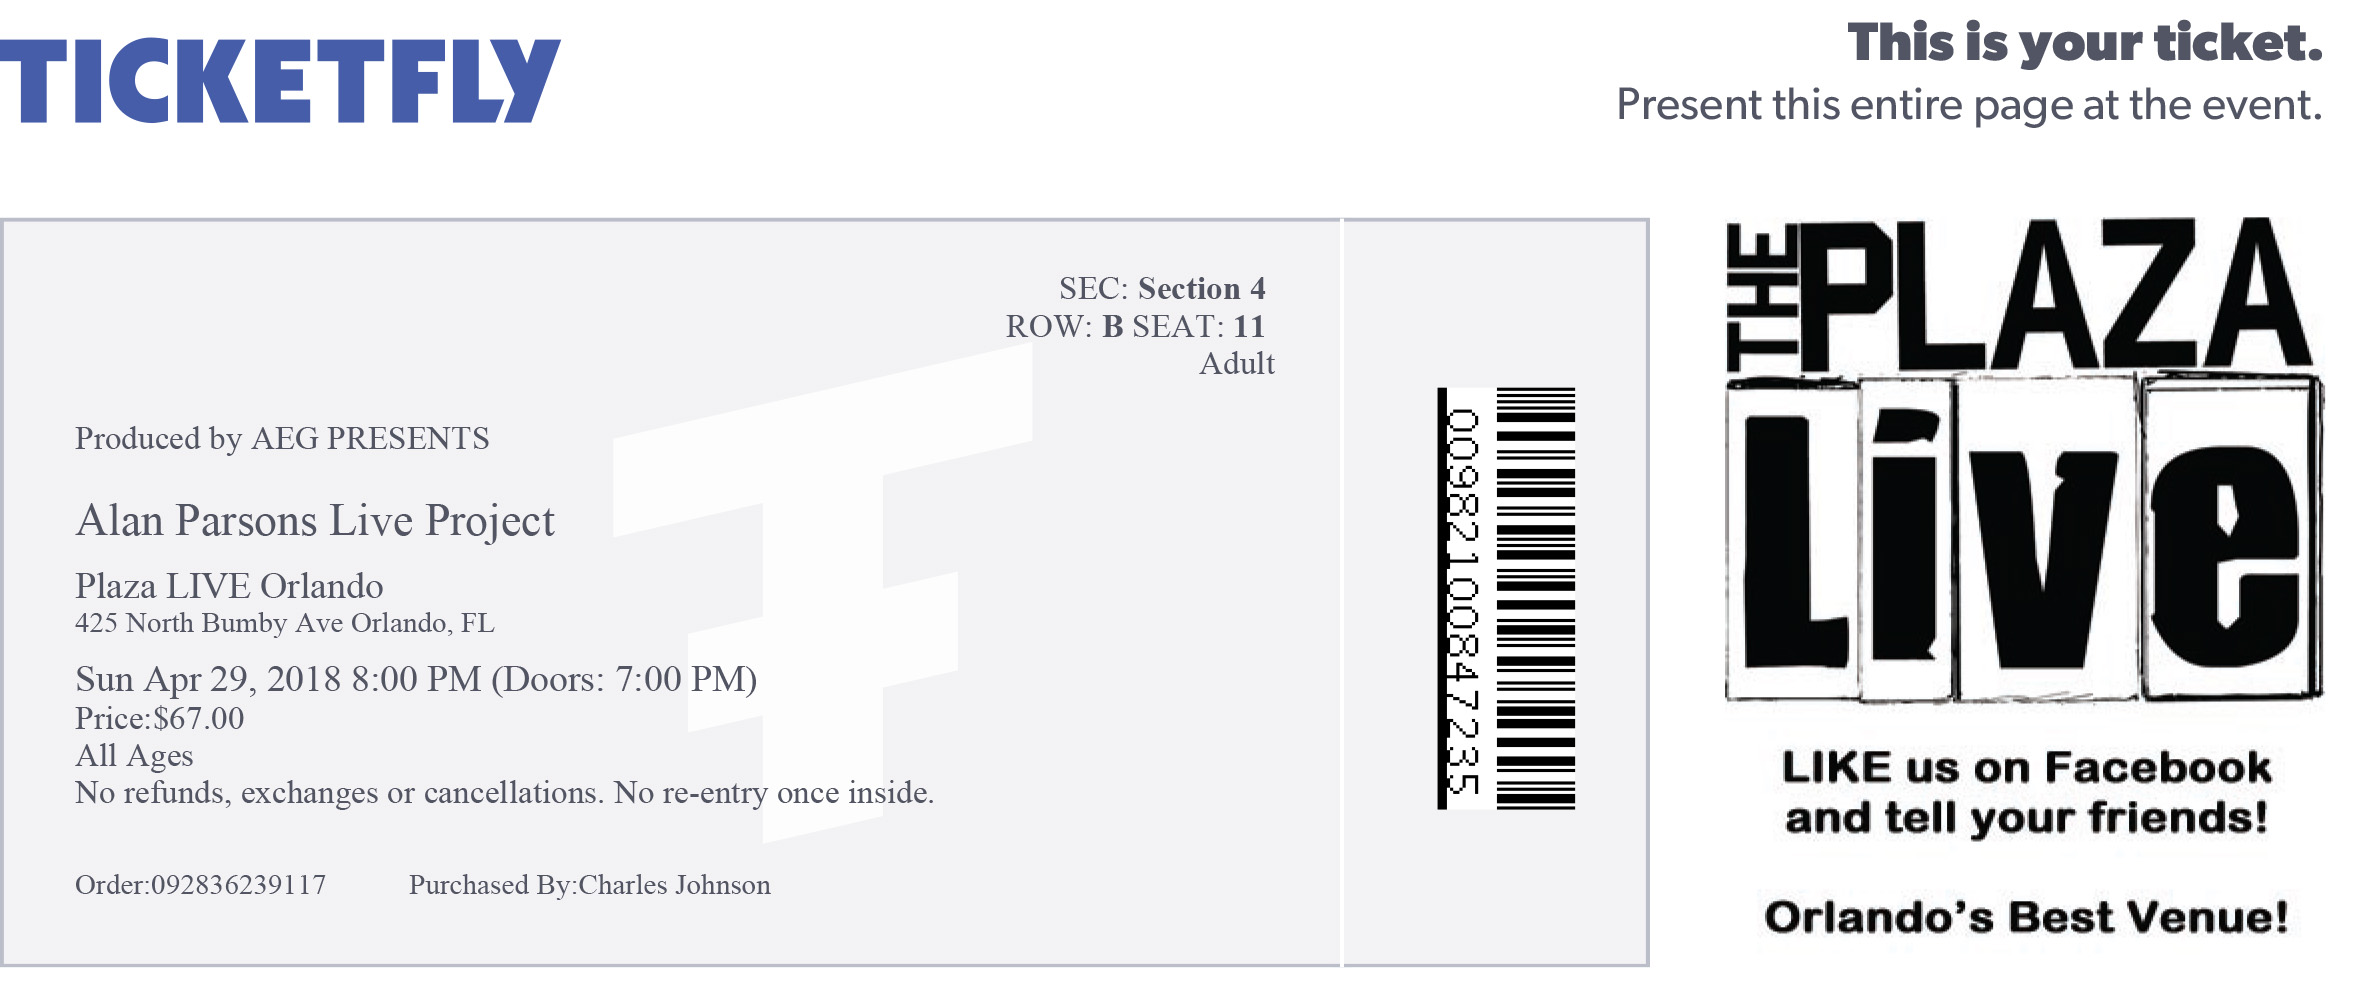 Alan Parsons Live Project concert ticket for the Plaza Live, Orlando, Florida on 29 April 2018